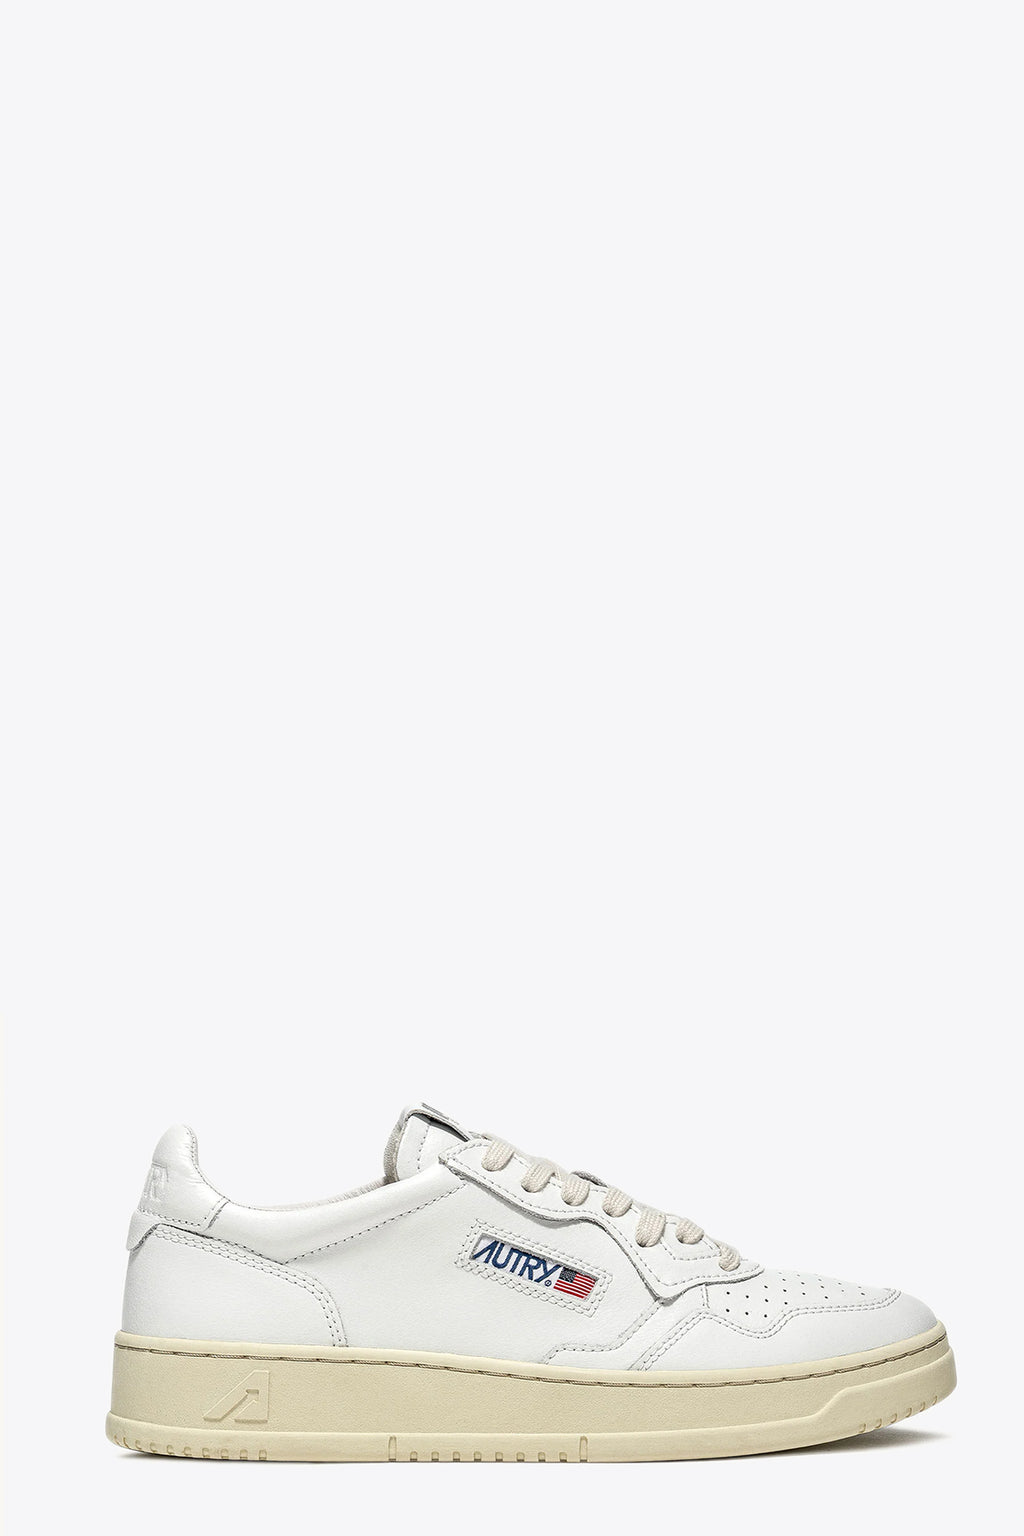 alt-image__White-leather-low-sneakers---Medalist-low